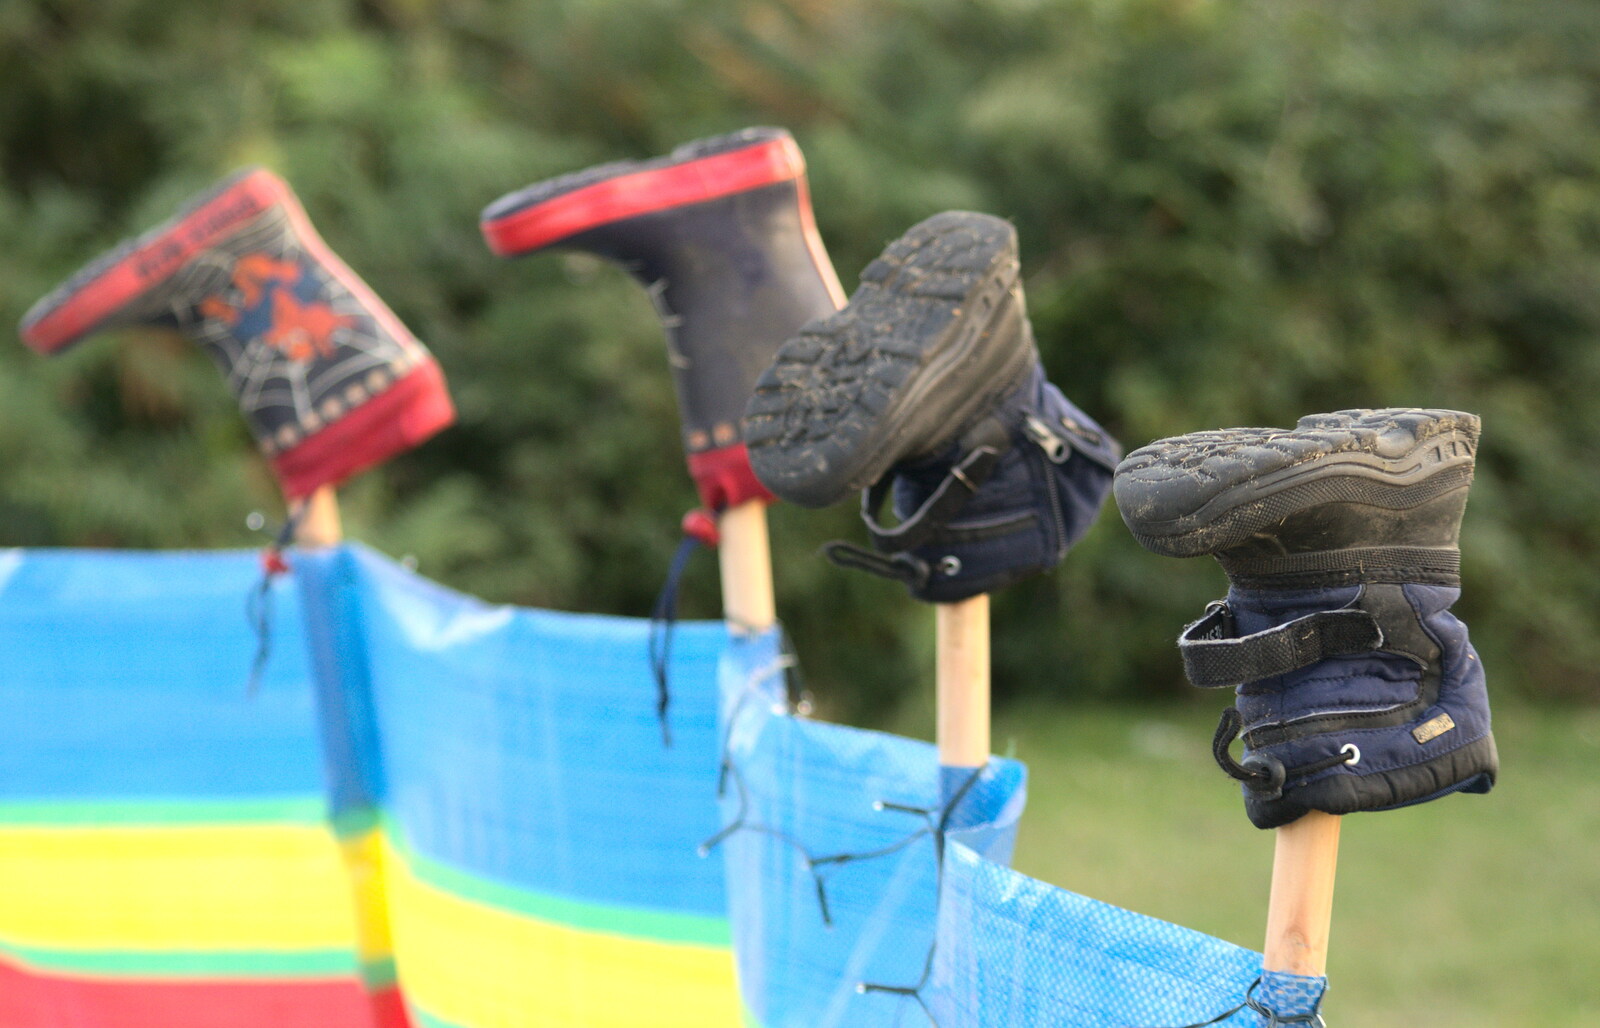 The boys' shoes are on sticks to dry from Camping at Roundhills, Brockenhurst, New Forest, Hampshire - 29th August 2015